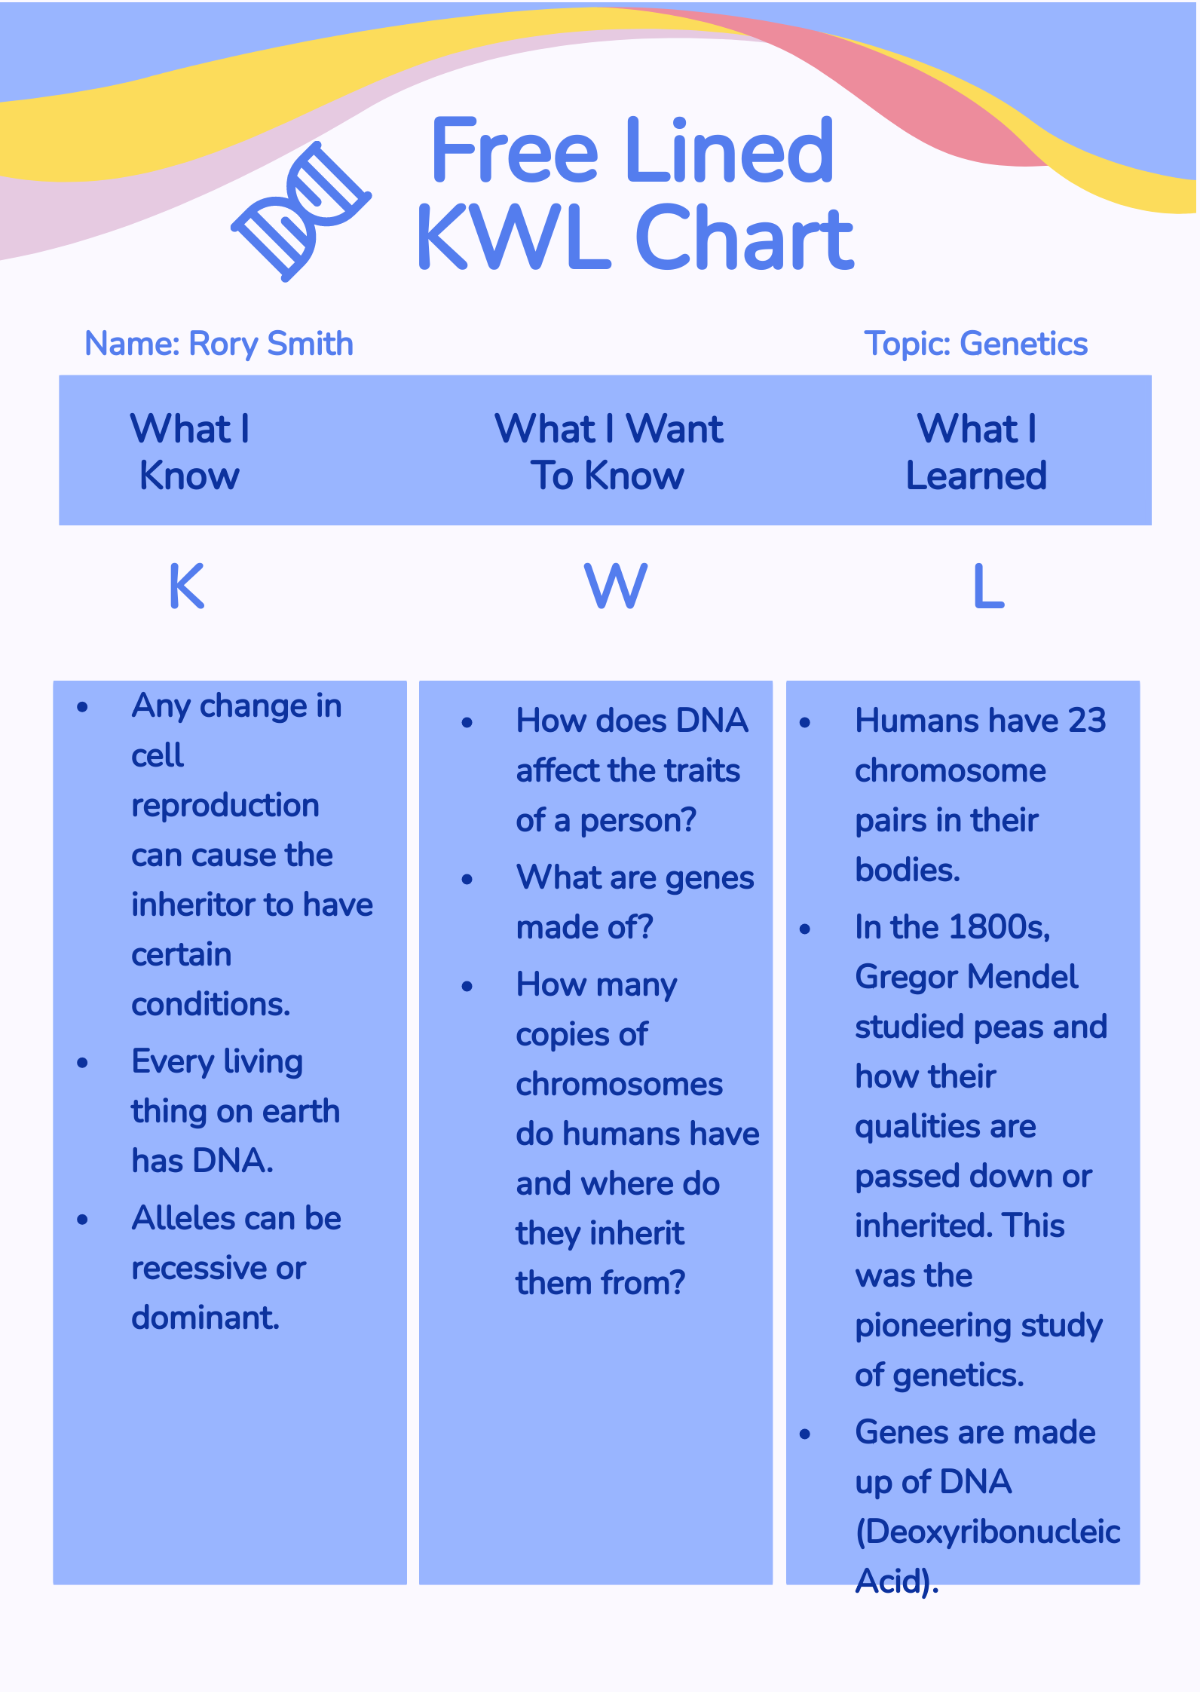 Free Lined KWL Chart Template